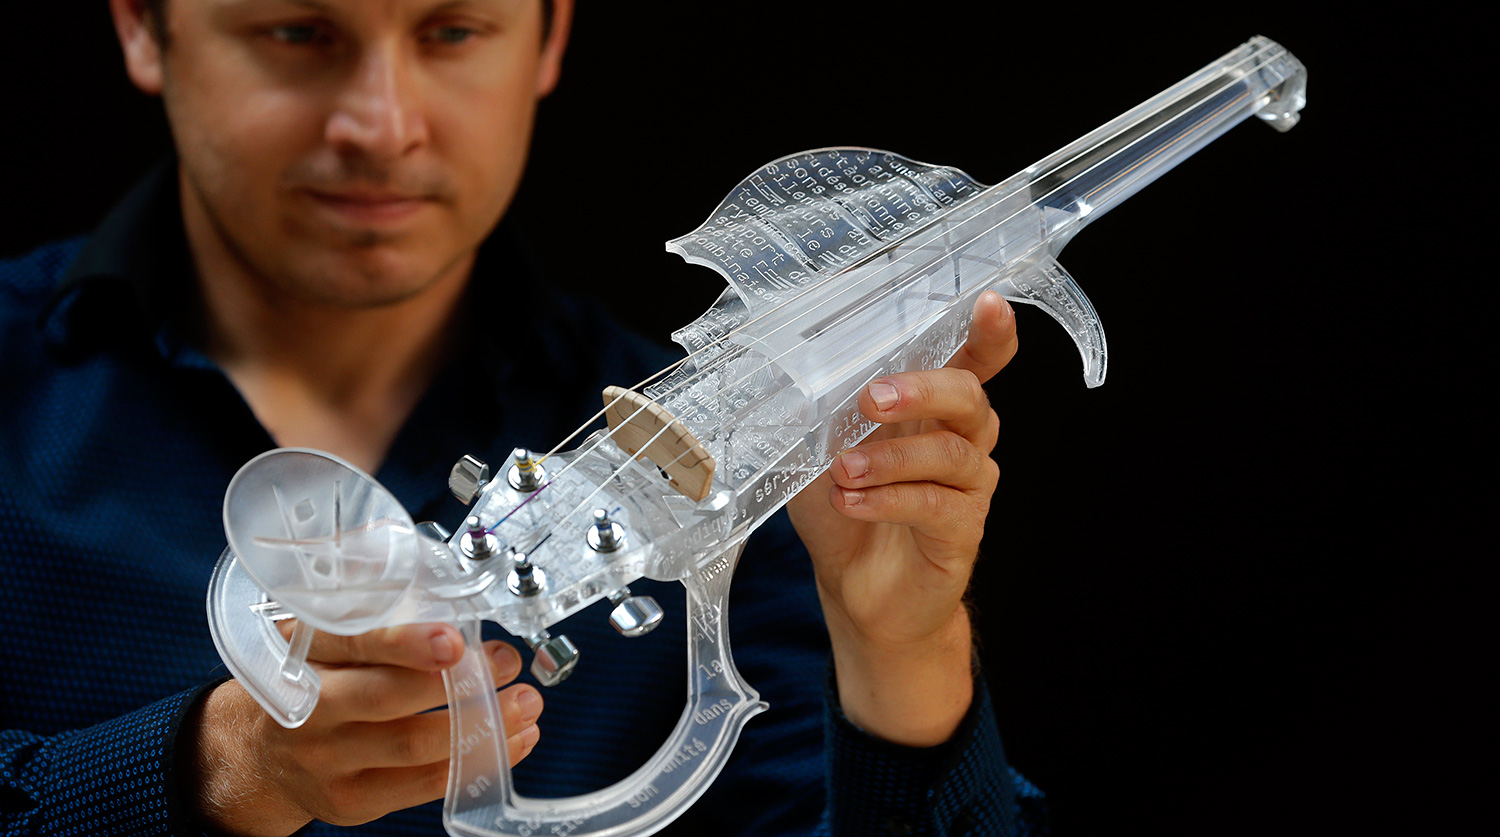 French engineer and professional violinist Laurent Bernadac poses with his 3D printed violin in Paris